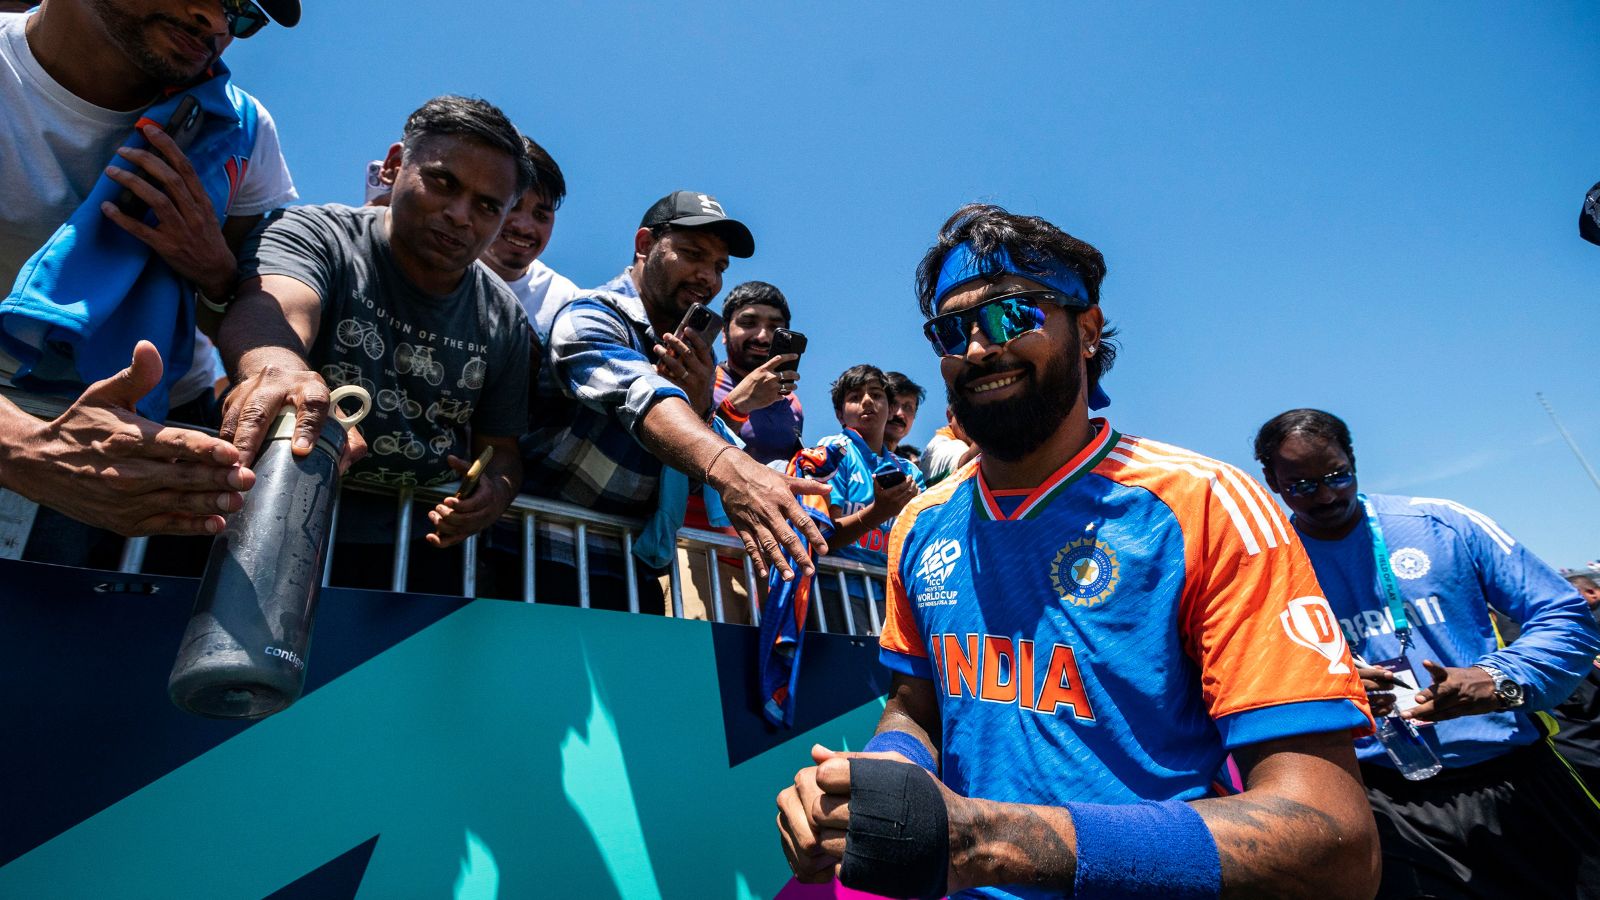 Hardik Pandya attributes success to World Cups, claims Indians dominate after 3-wicket haul against Ireland